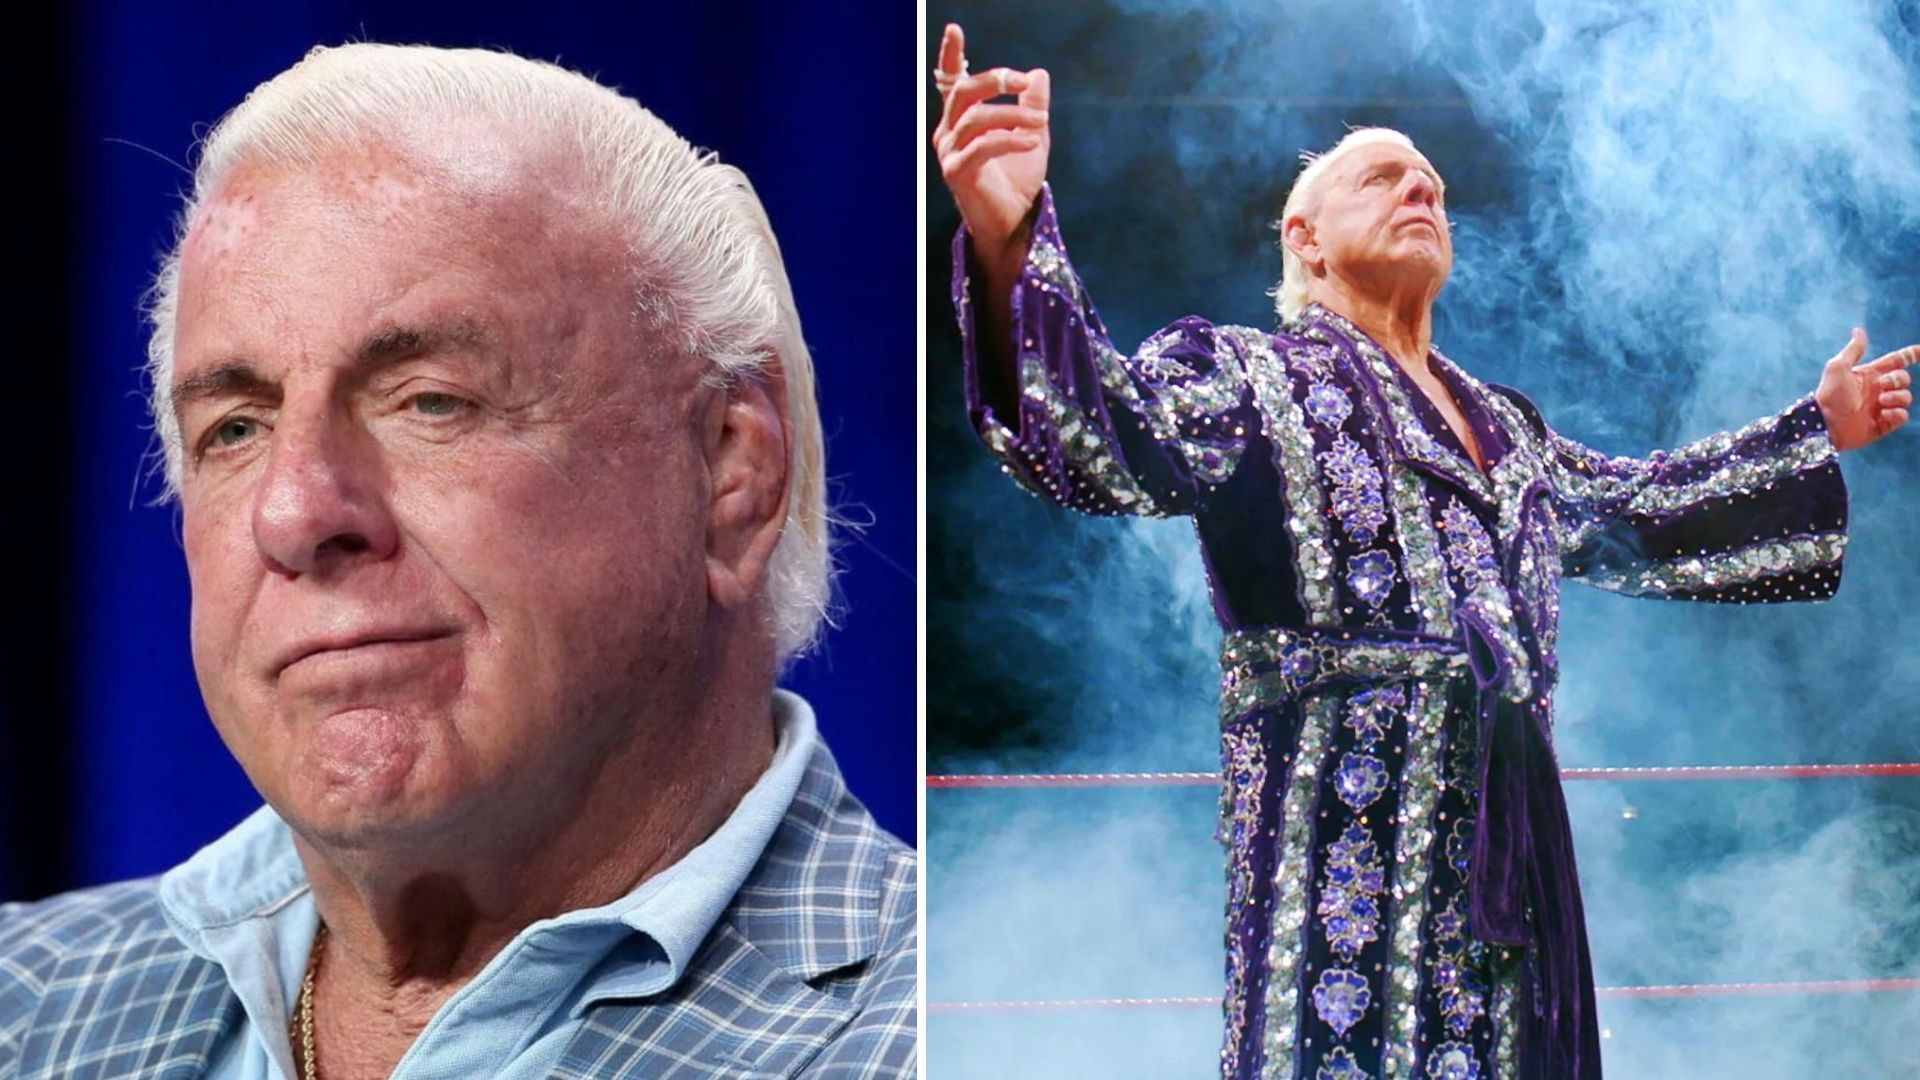 Ric Flair is one of the greatest wrestlers of all-time